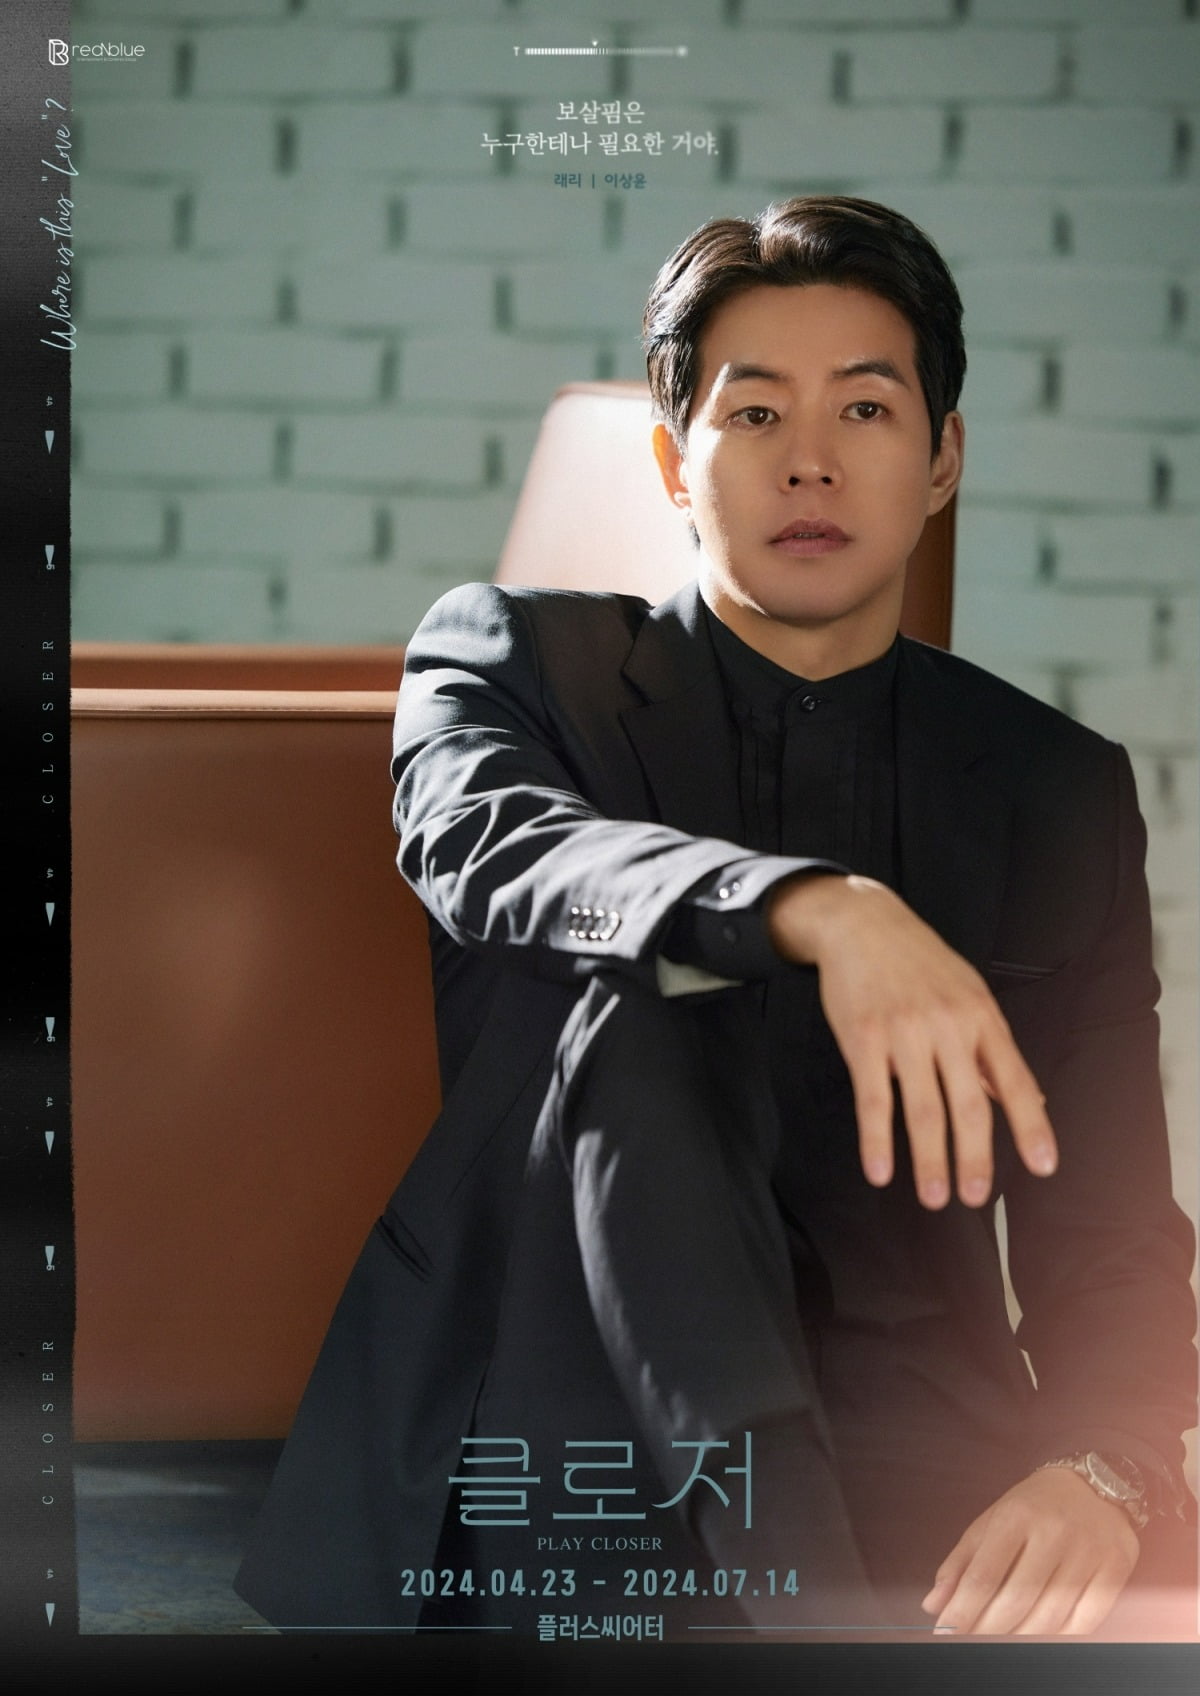 Lee Sang-yoon returns to the theater stage after 7 months